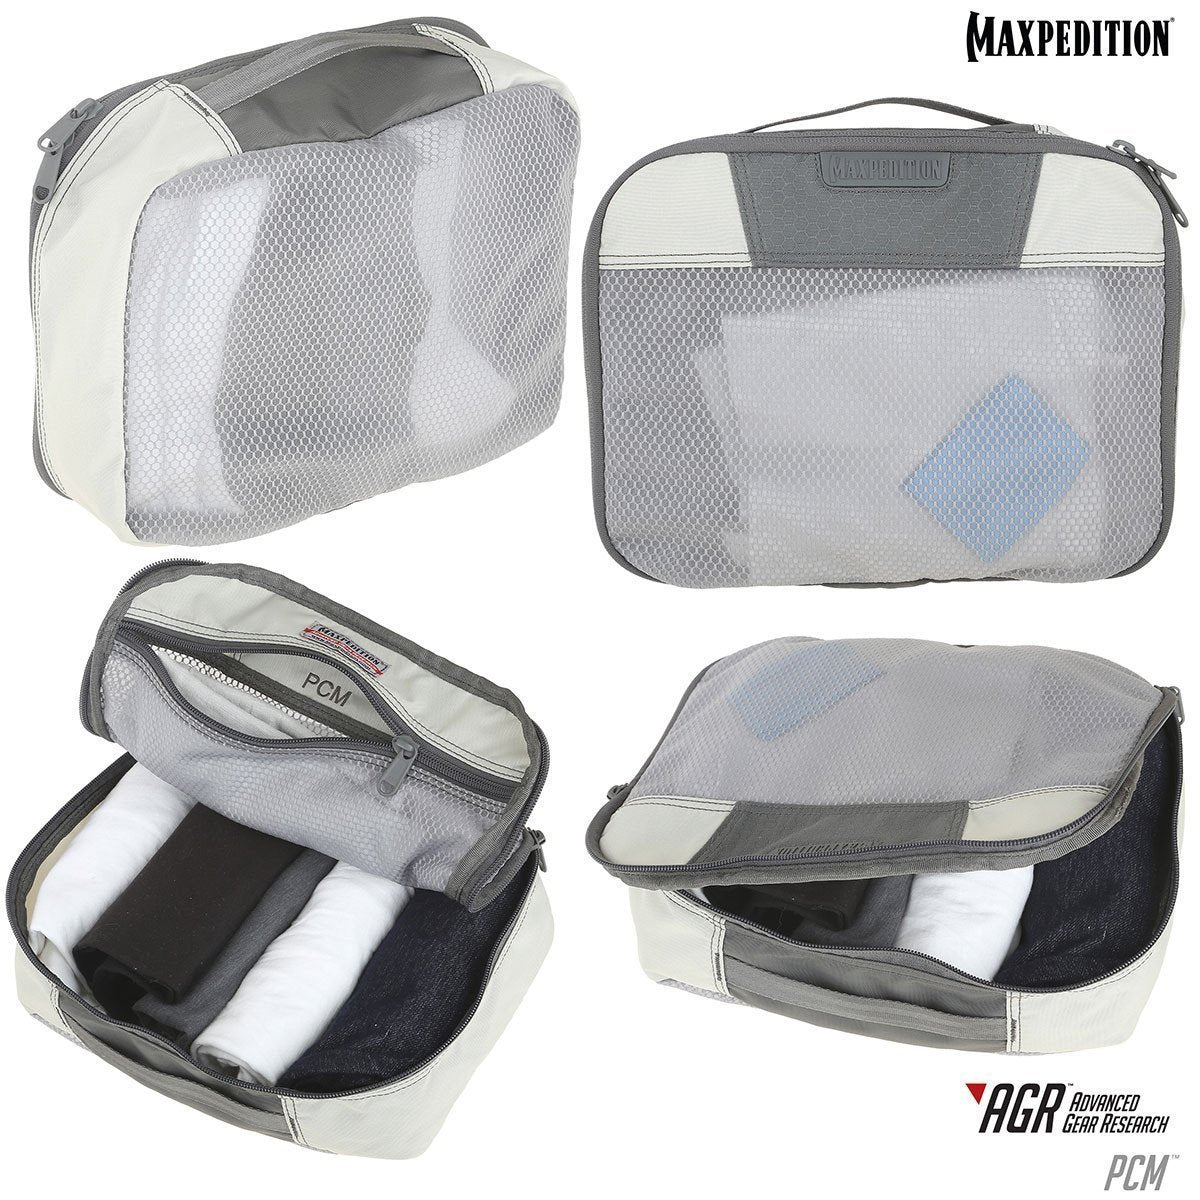 PCM™ Packing Cube Medium | Maxpedition  Tactical Gear